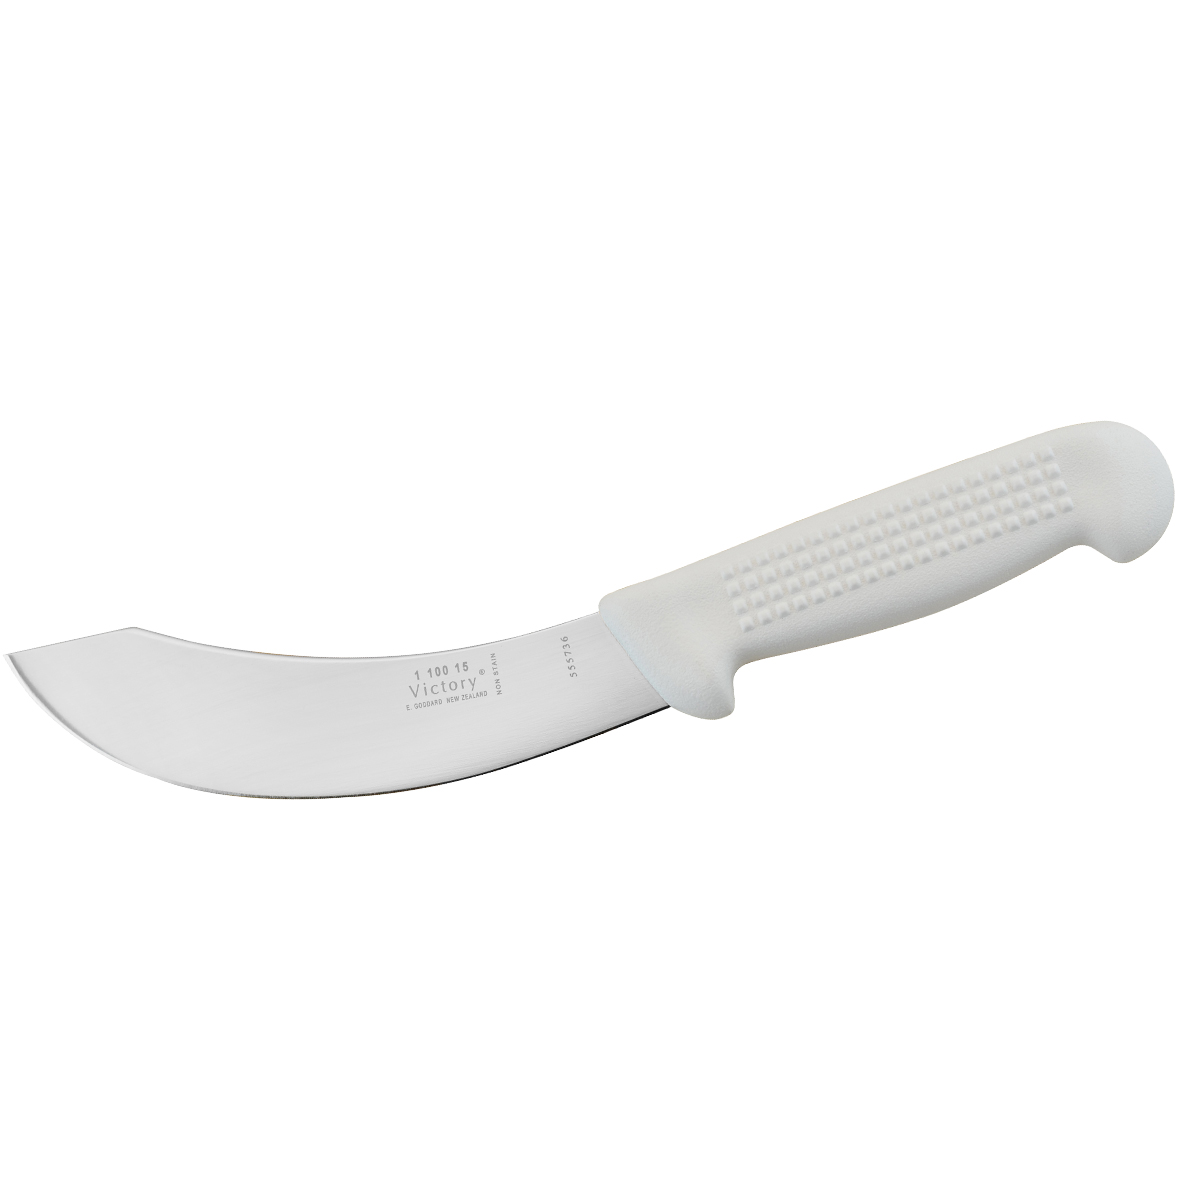 Victory Skinning Knife, 15cm (6) - High Carbon - White